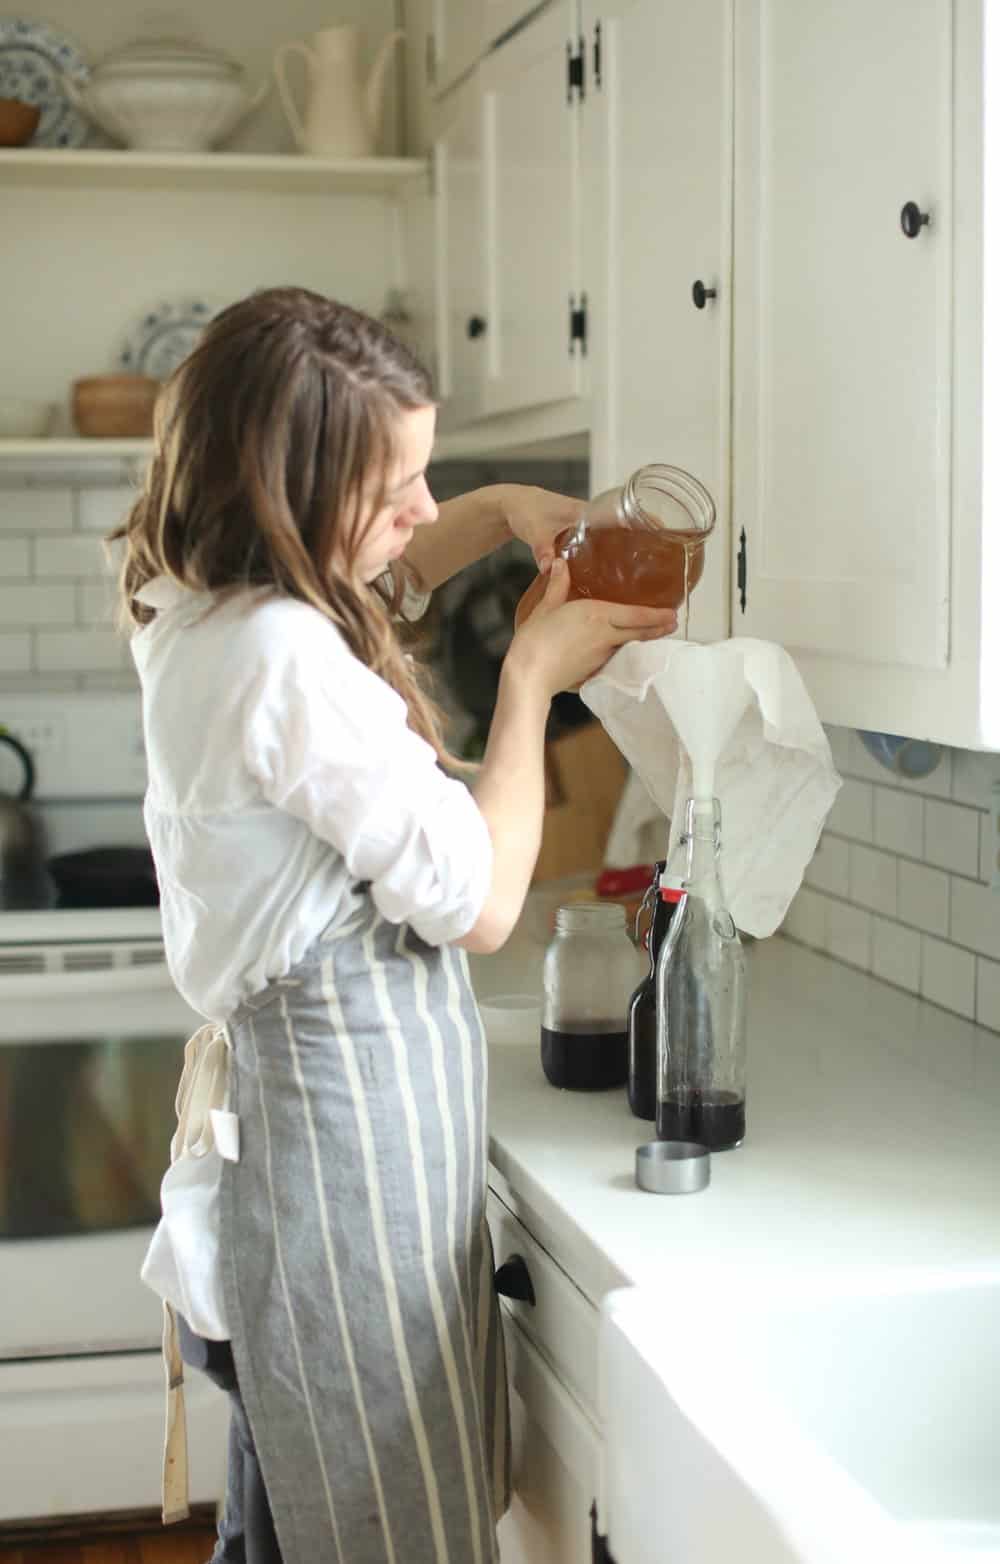 women wearing a white shirt and a stripped apron is pouring a mason jar full of water kefir into a bottle